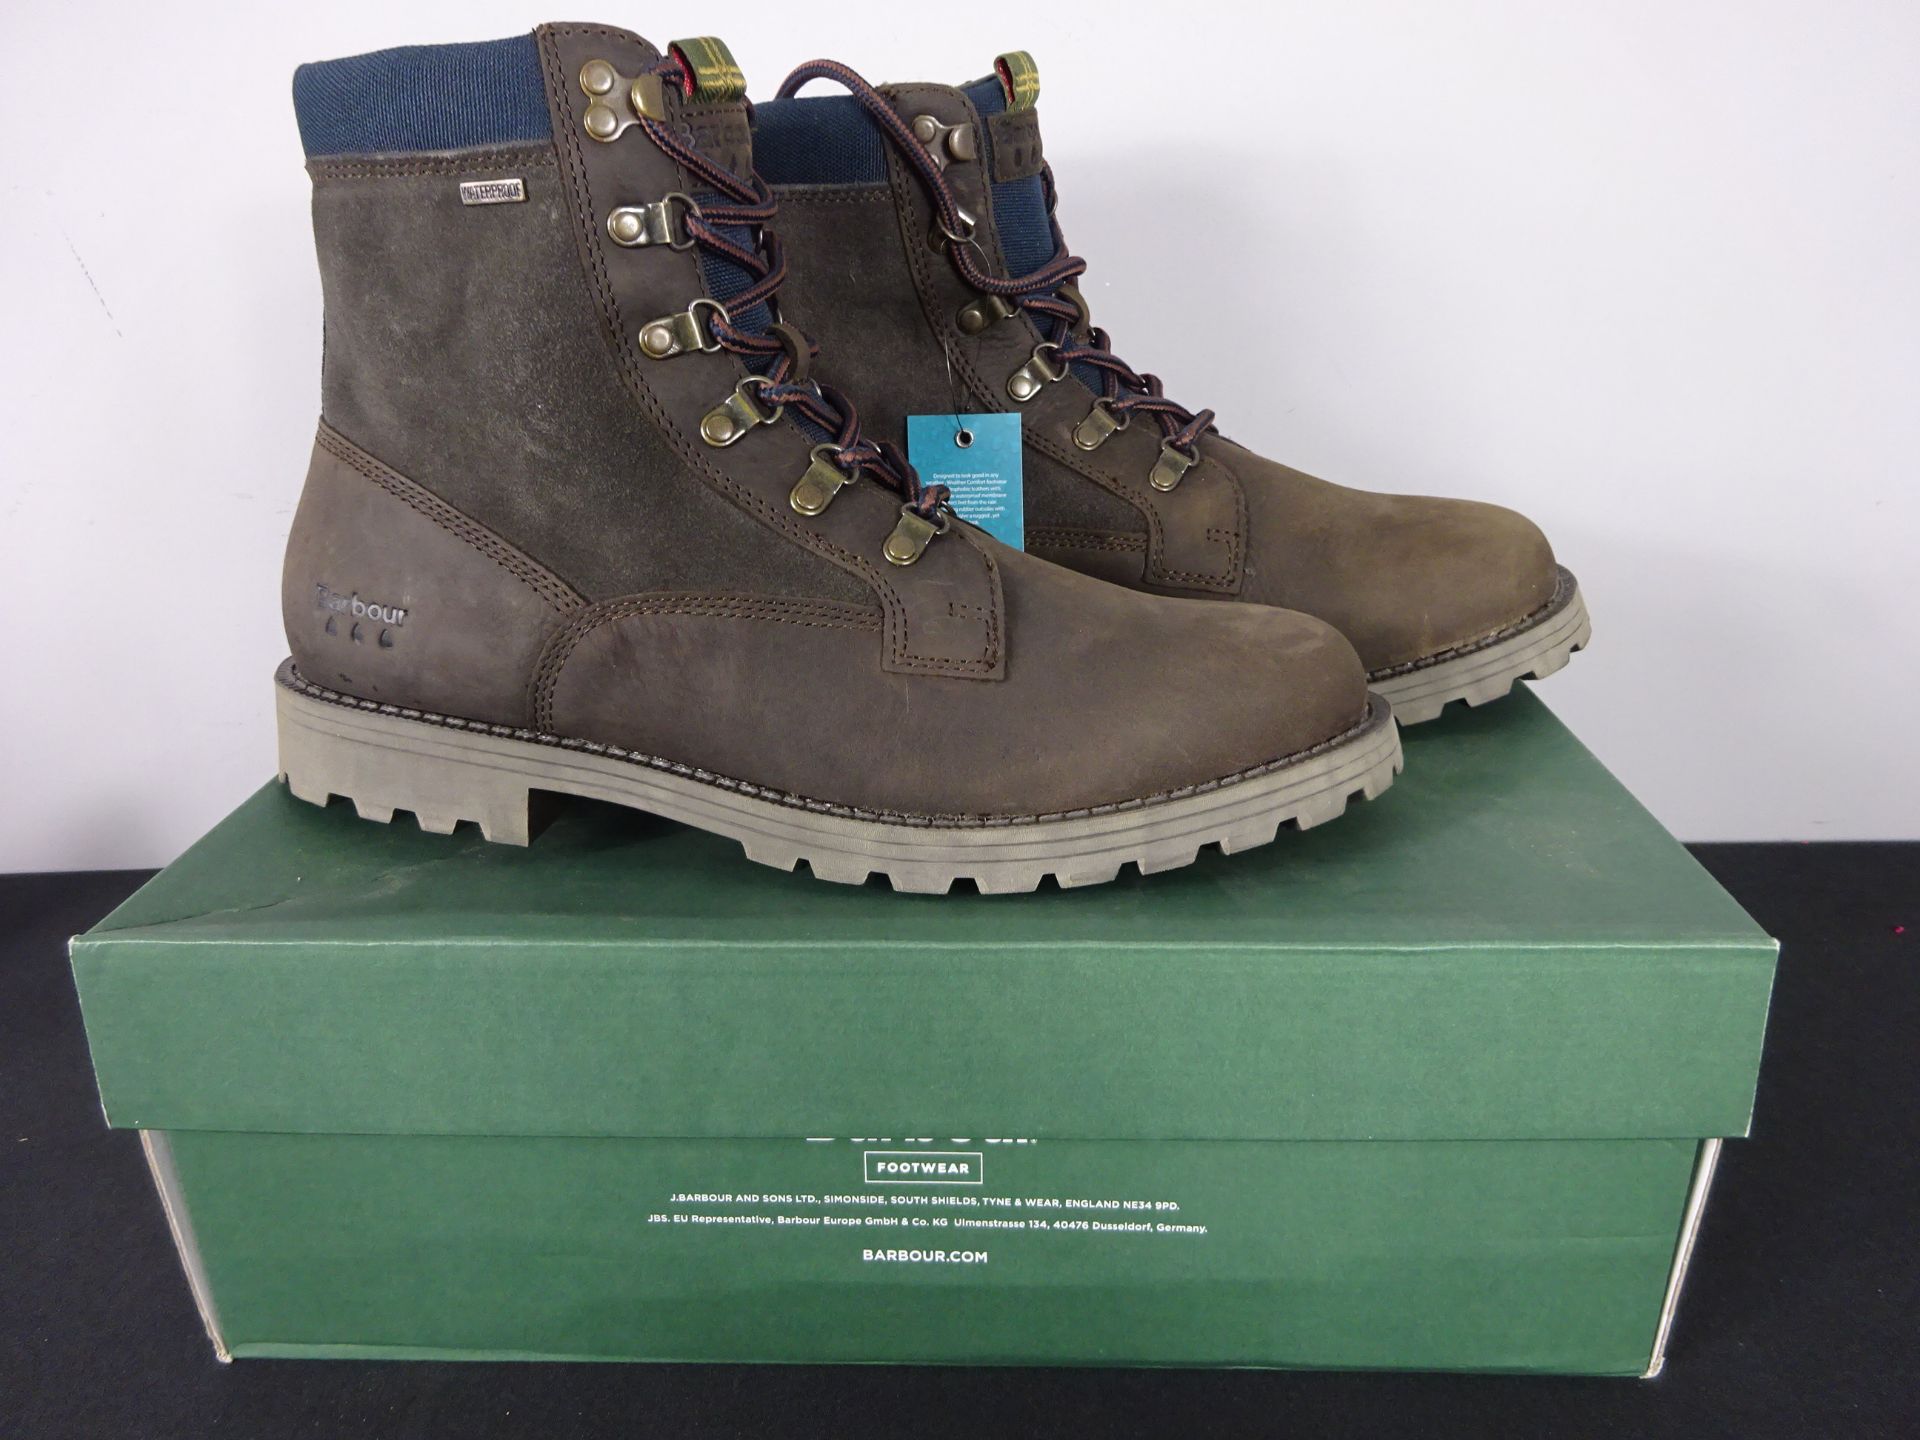 RRP £129.99 - New Barbour Chiltern Boots - Size 11.